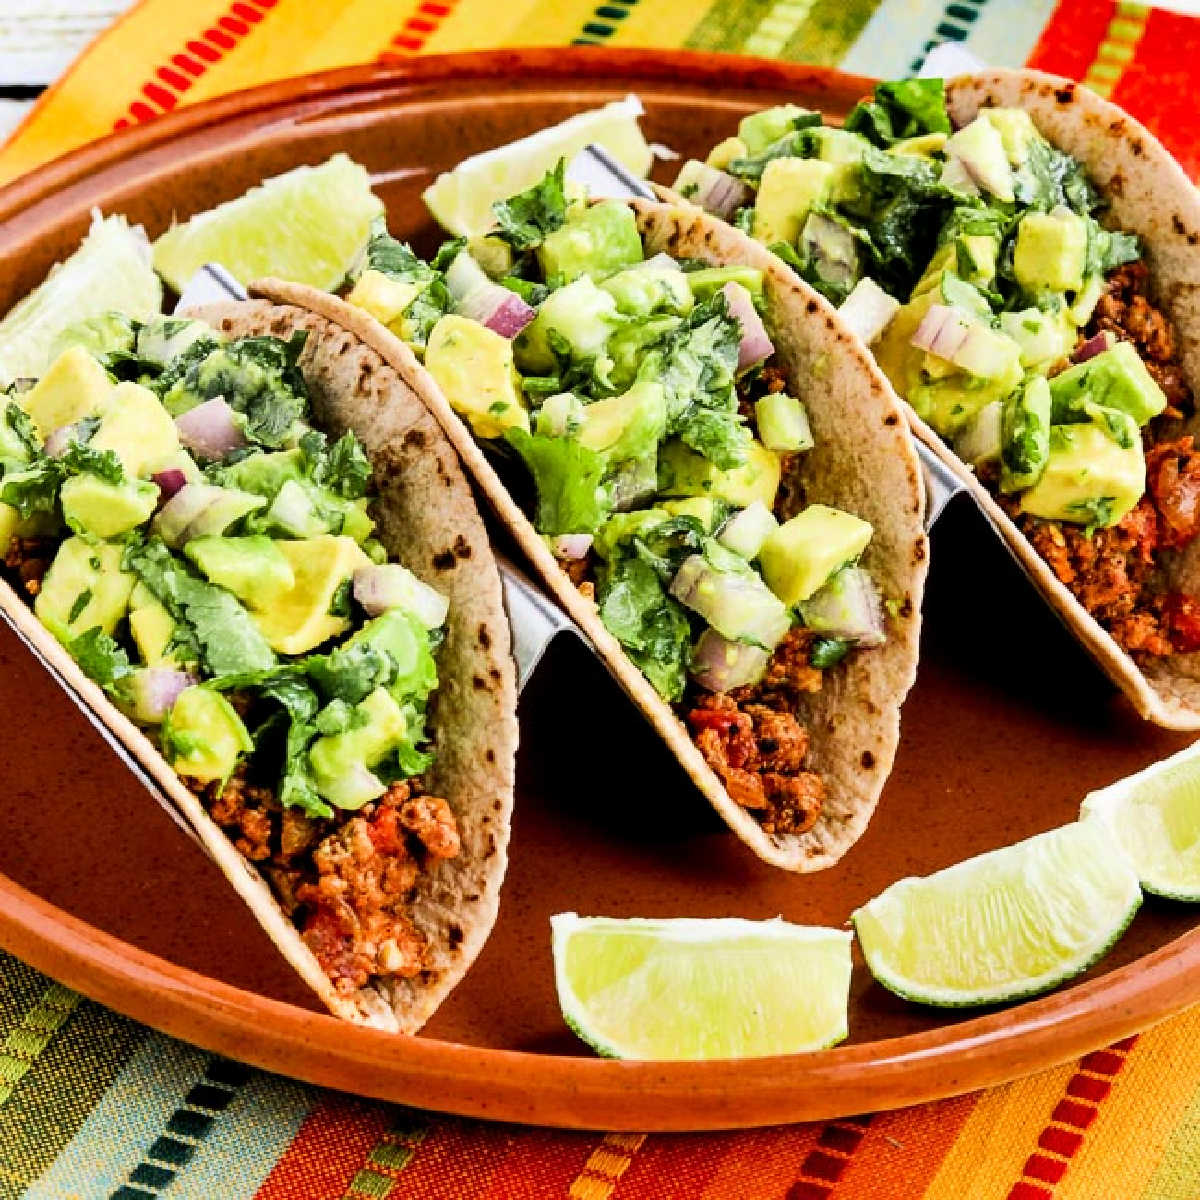 Square image for Turkey Tacos with Avocado Salsa shown on serving platter with limes.